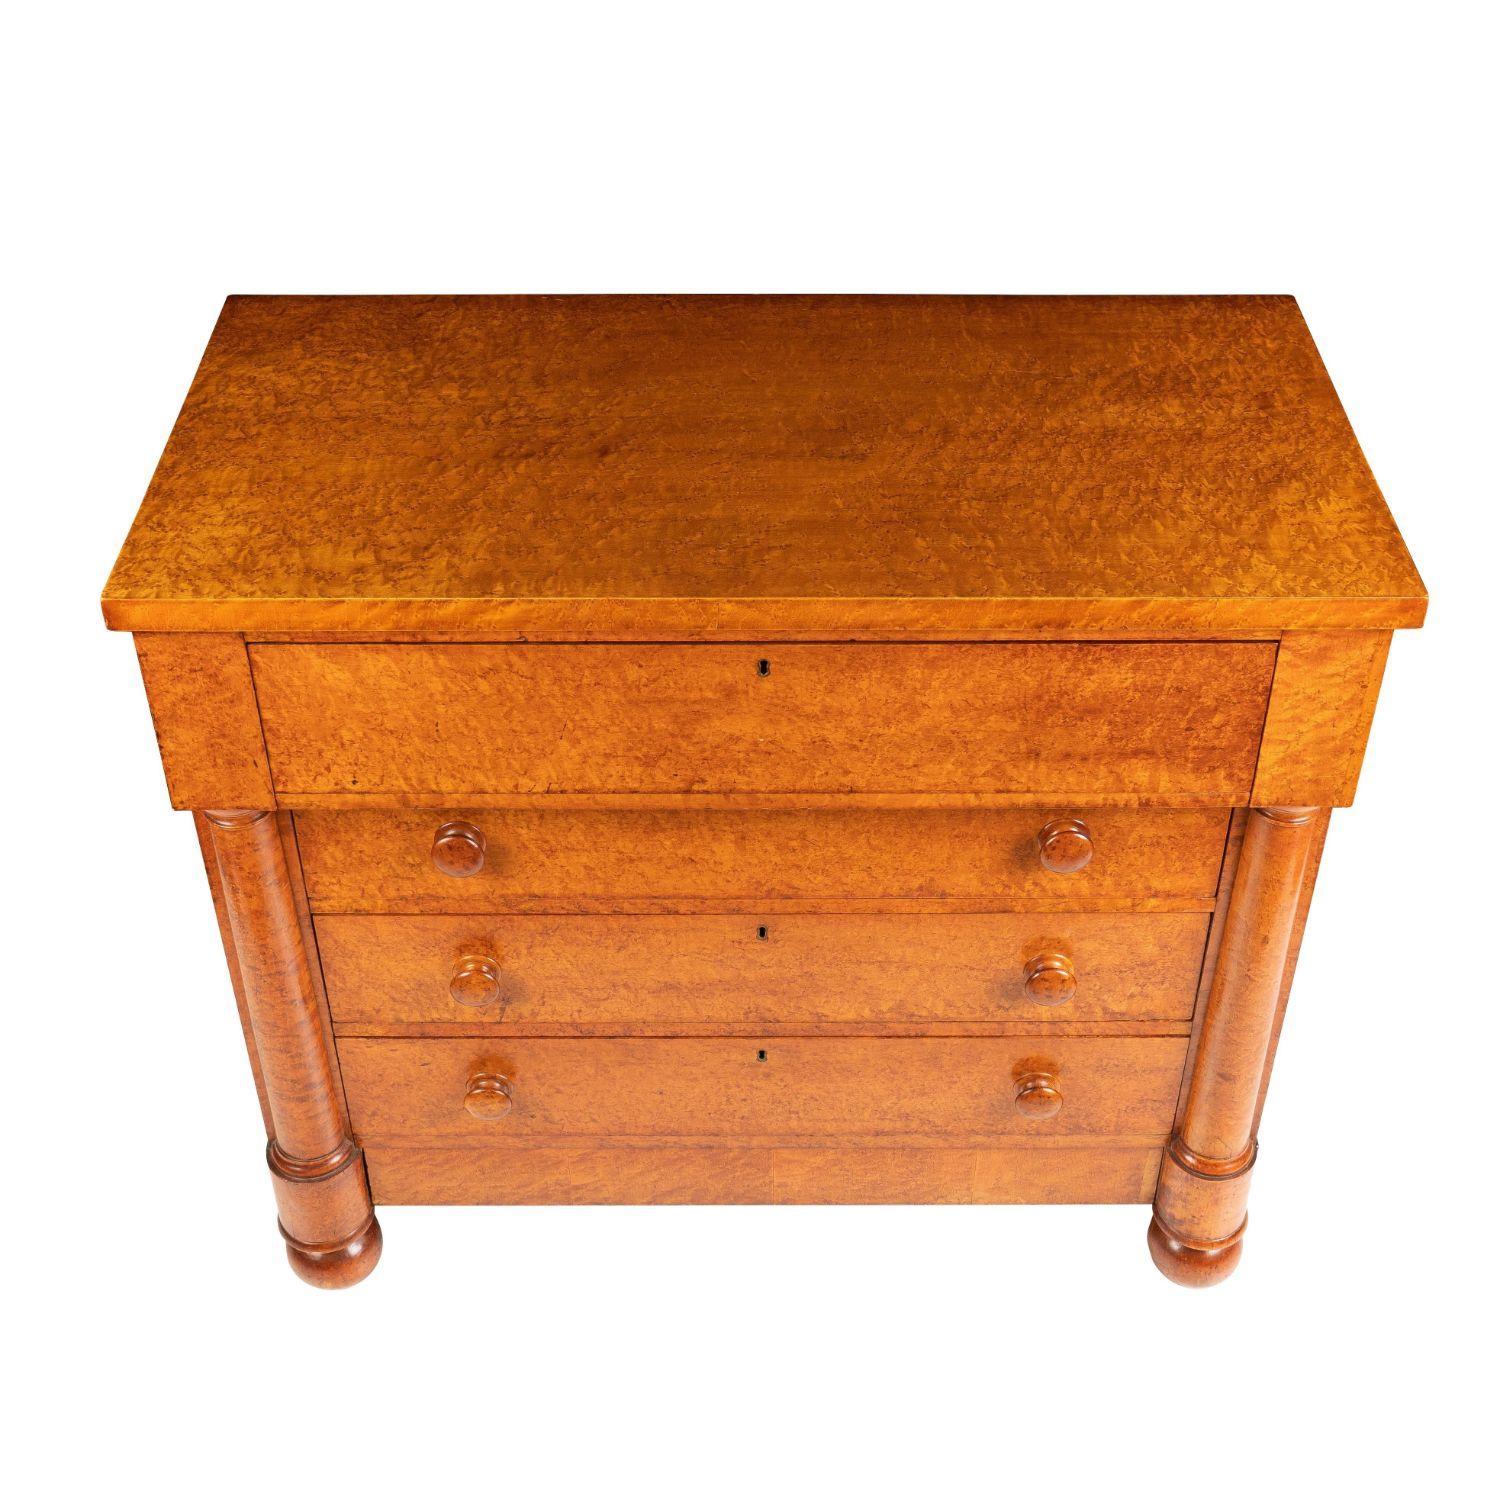 American Neoclassic Bird's Eye Maple Four Drawer Chest, 1820 In Excellent Condition For Sale In Kenilworth, IL